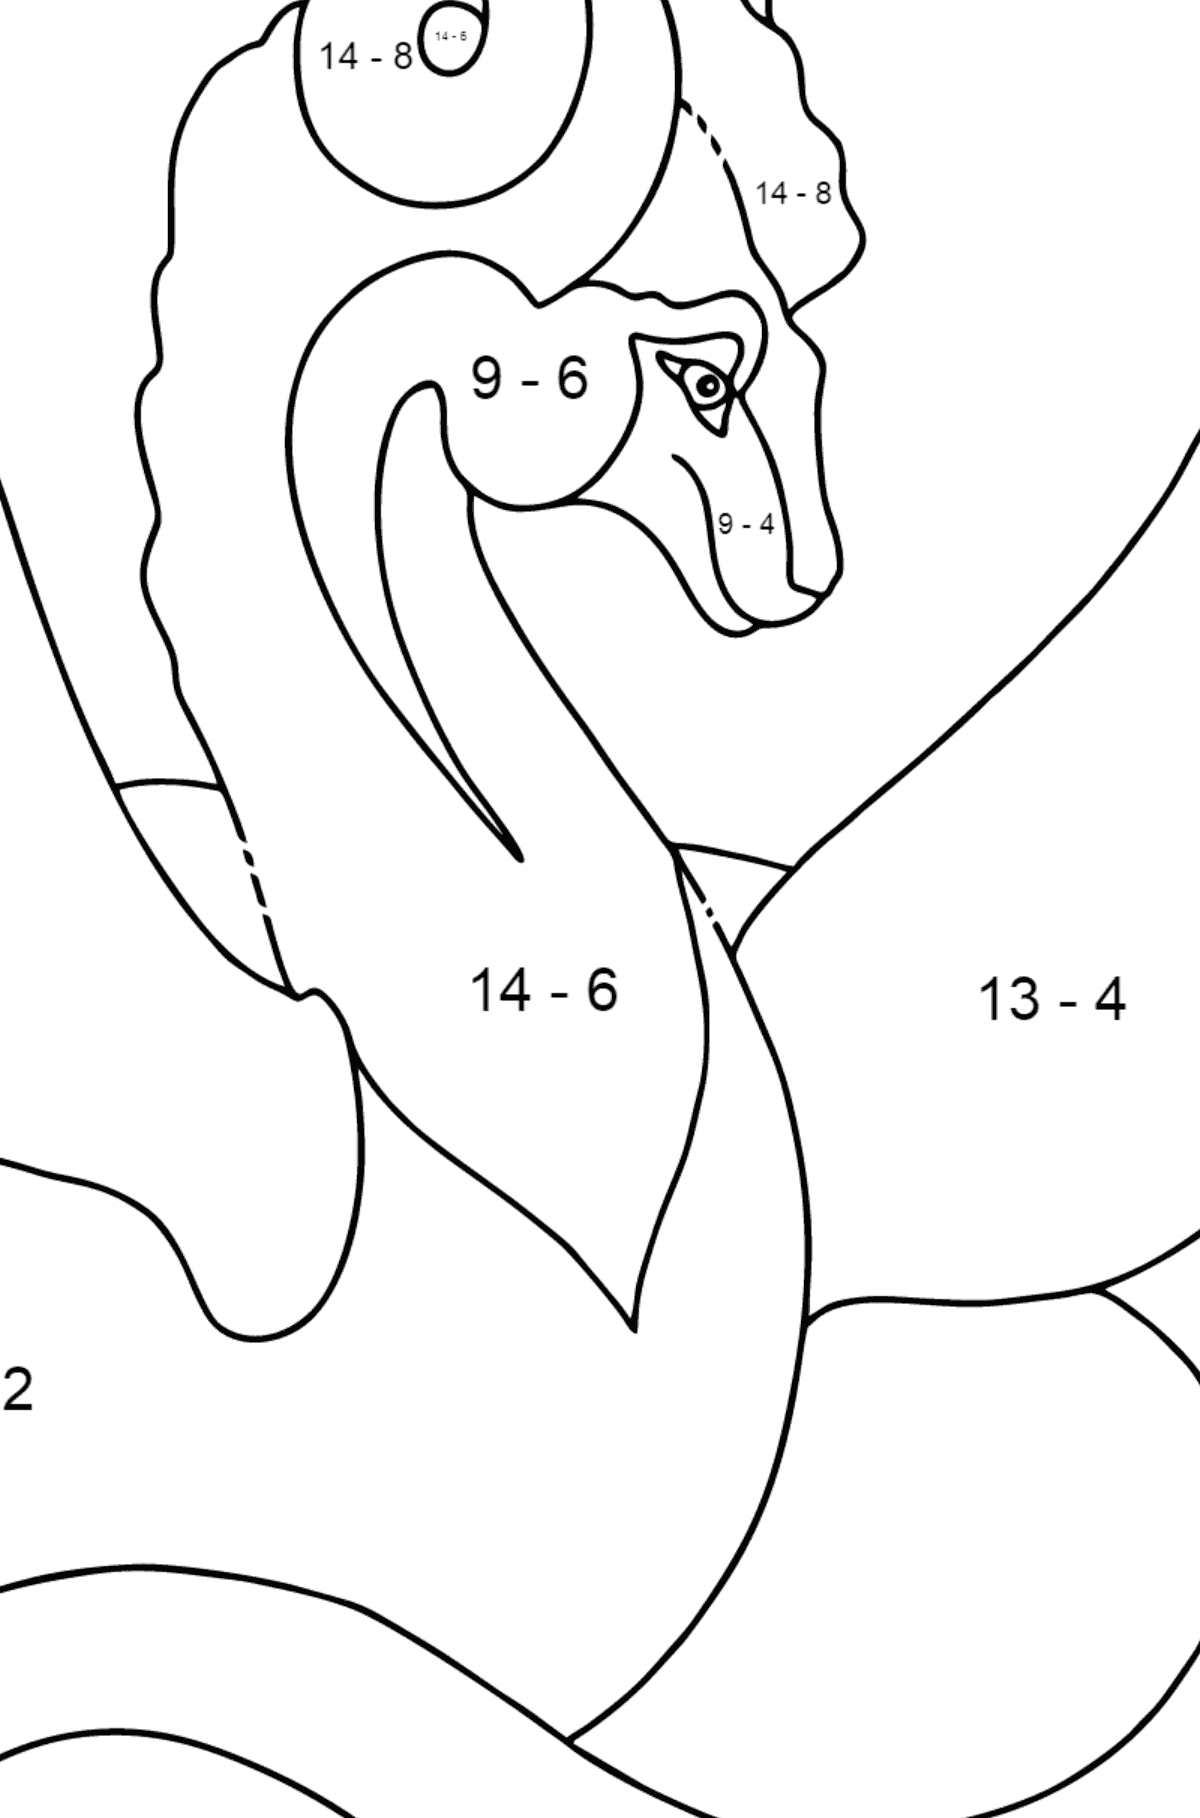 Cute Dragon Coloring Page (simple) - Math Coloring - Subtraction for Kids